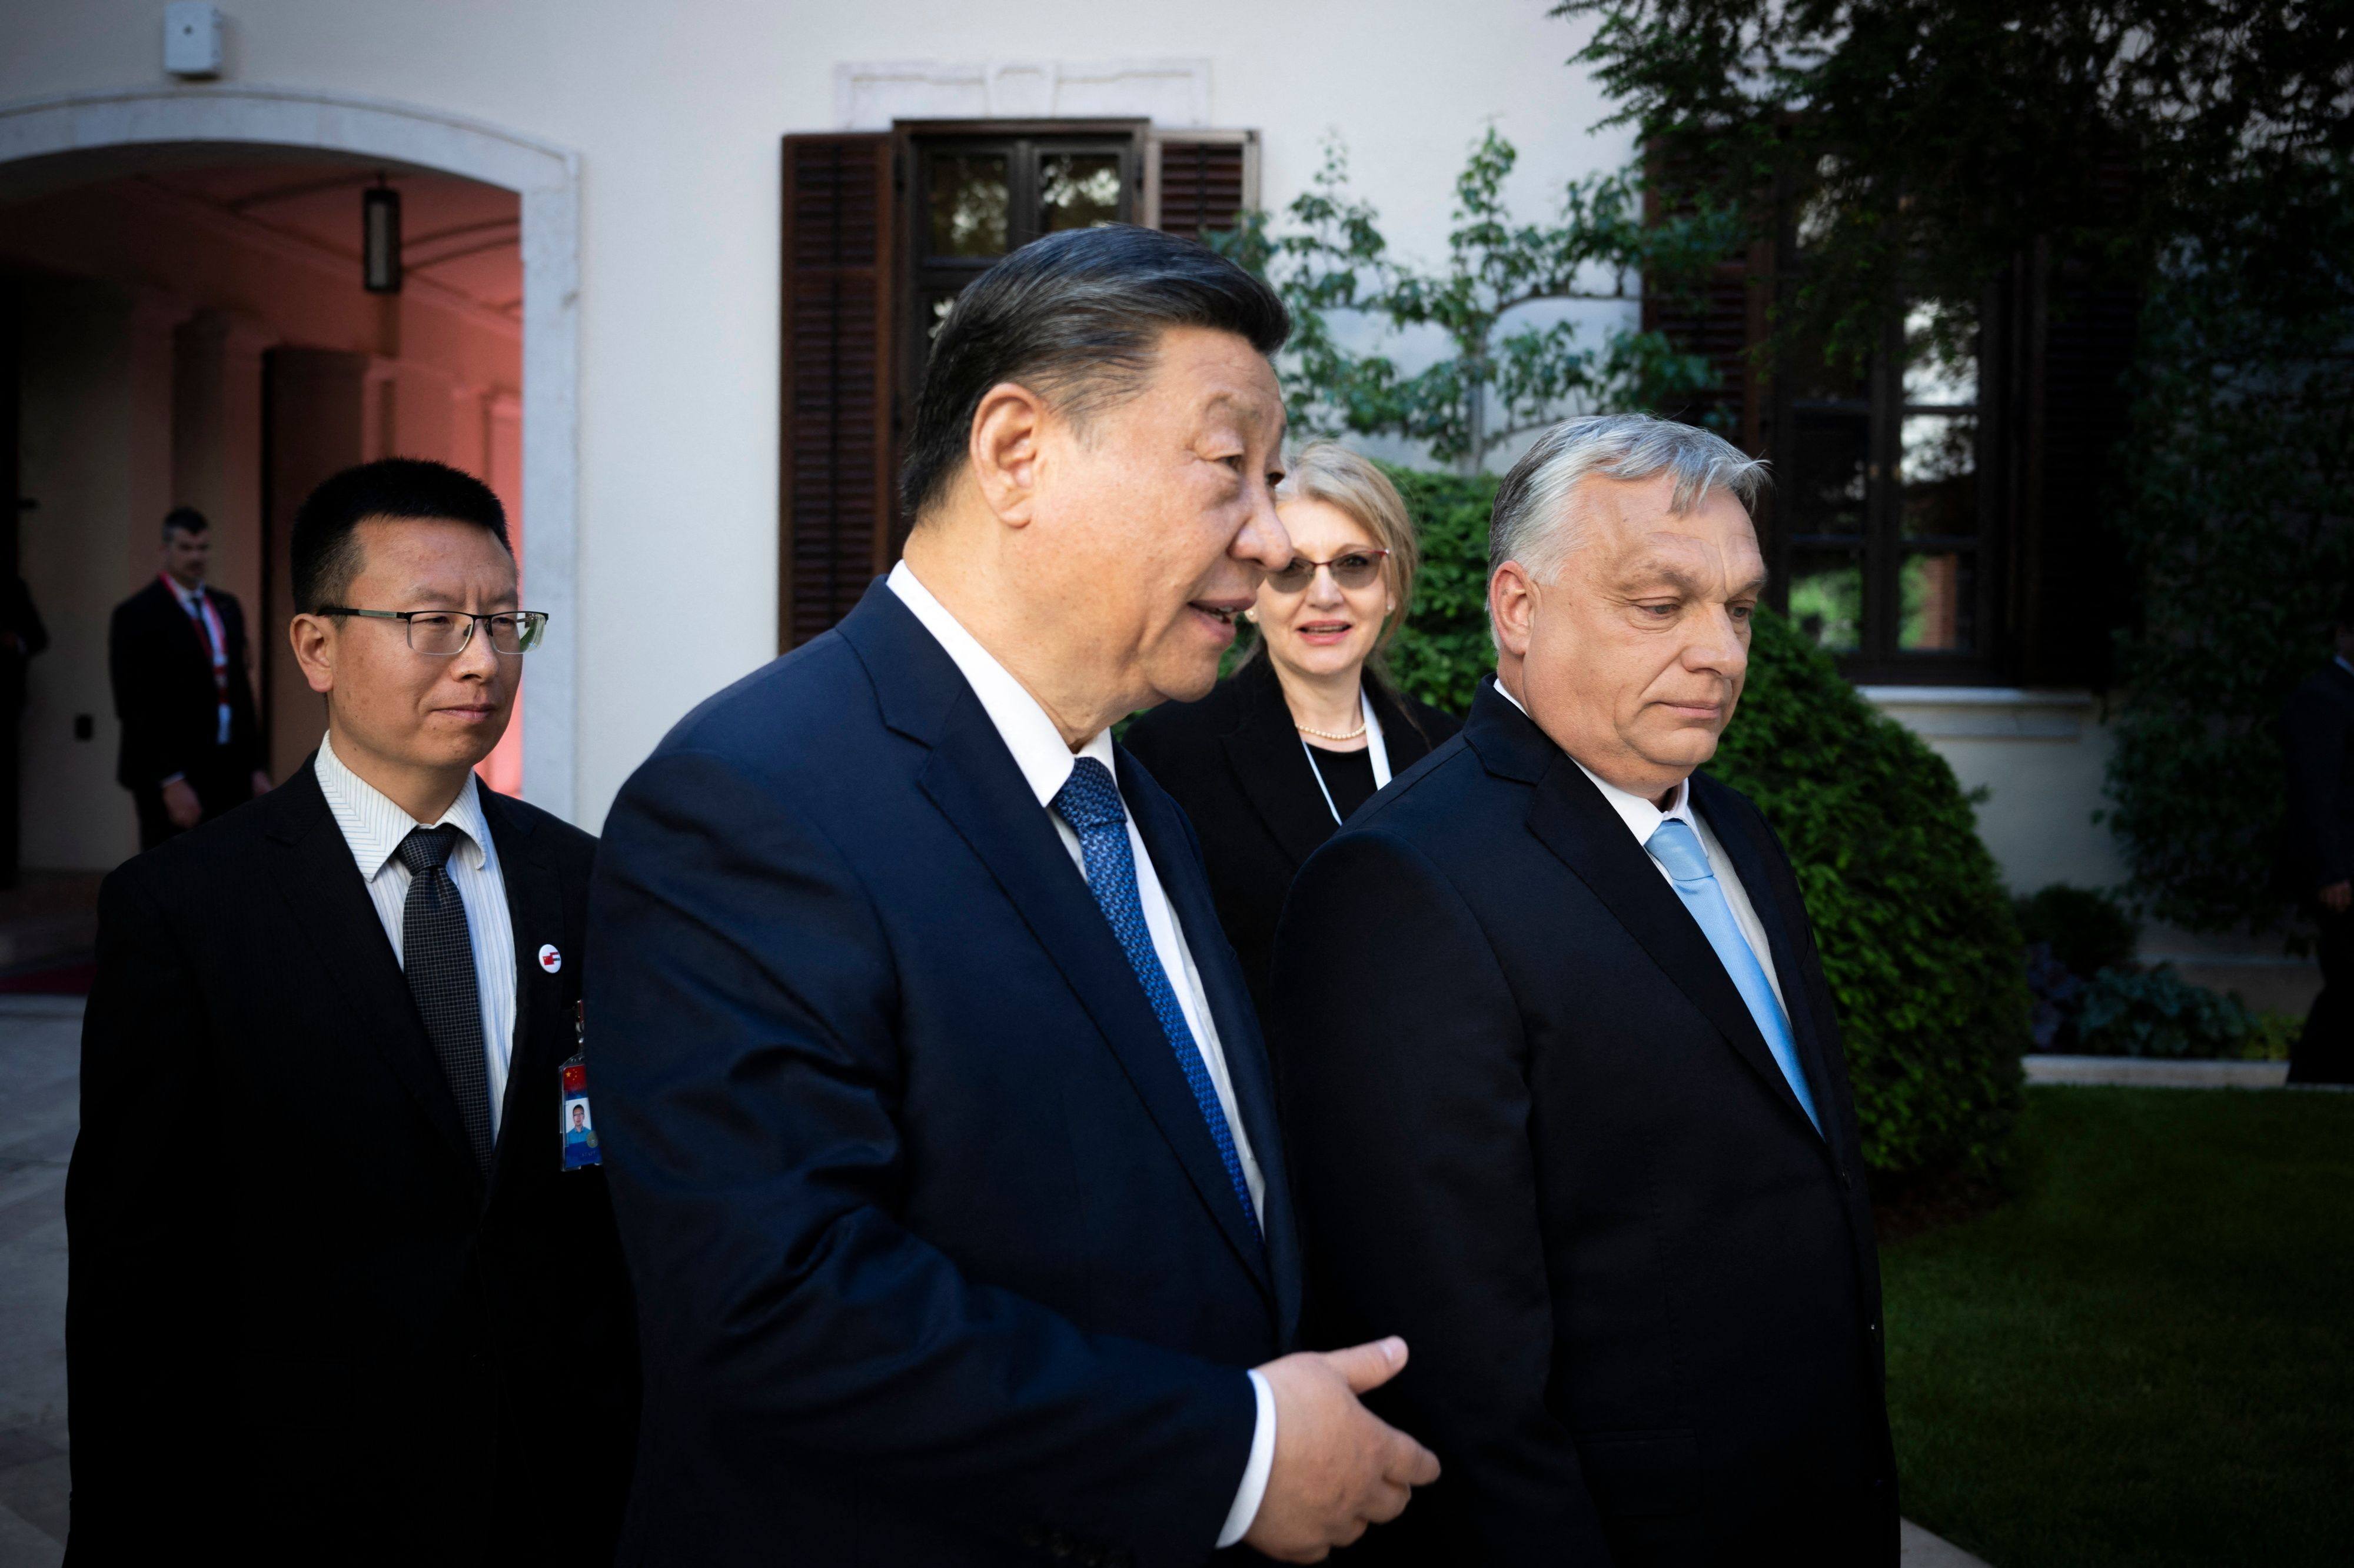 Chinese President Xi Jinping walks with Hungarian Prime Minister Viktor Orban before their talks in the prime minister’s office, the former Carmelite Monastery, in Budapest on May 9. Photo: AFP